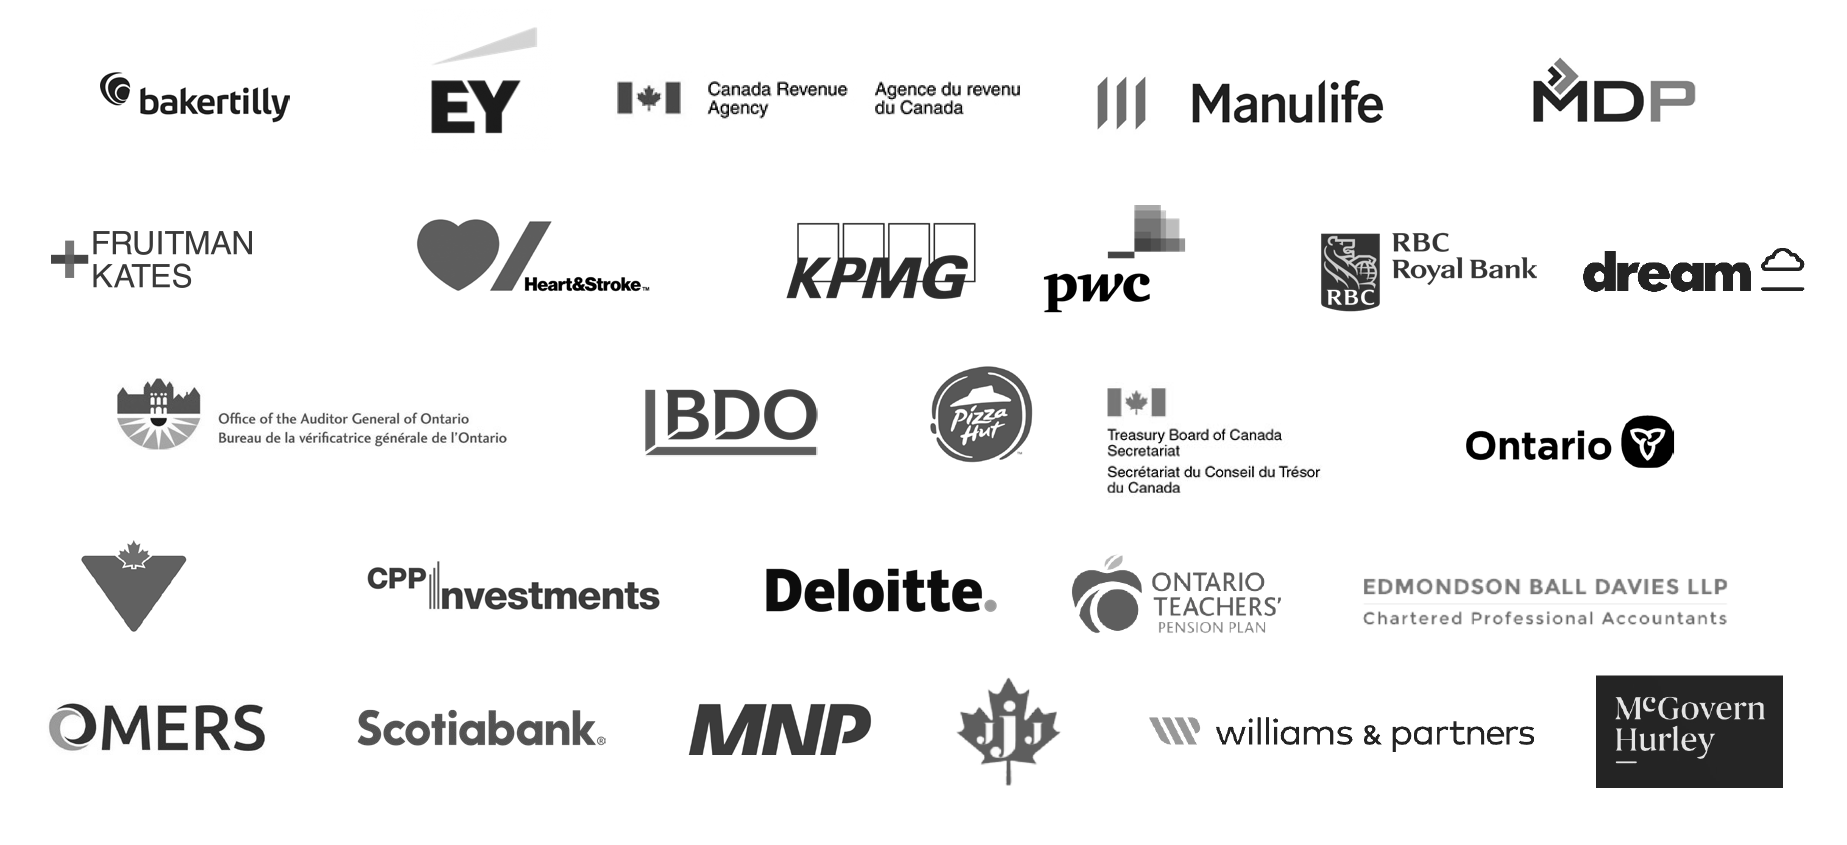 Graphic depicting employer logos including EY, KPMG, Deloitte, Manulife, MNP, Scotiabank, Ontario Government, OMERS, PwC, and more.